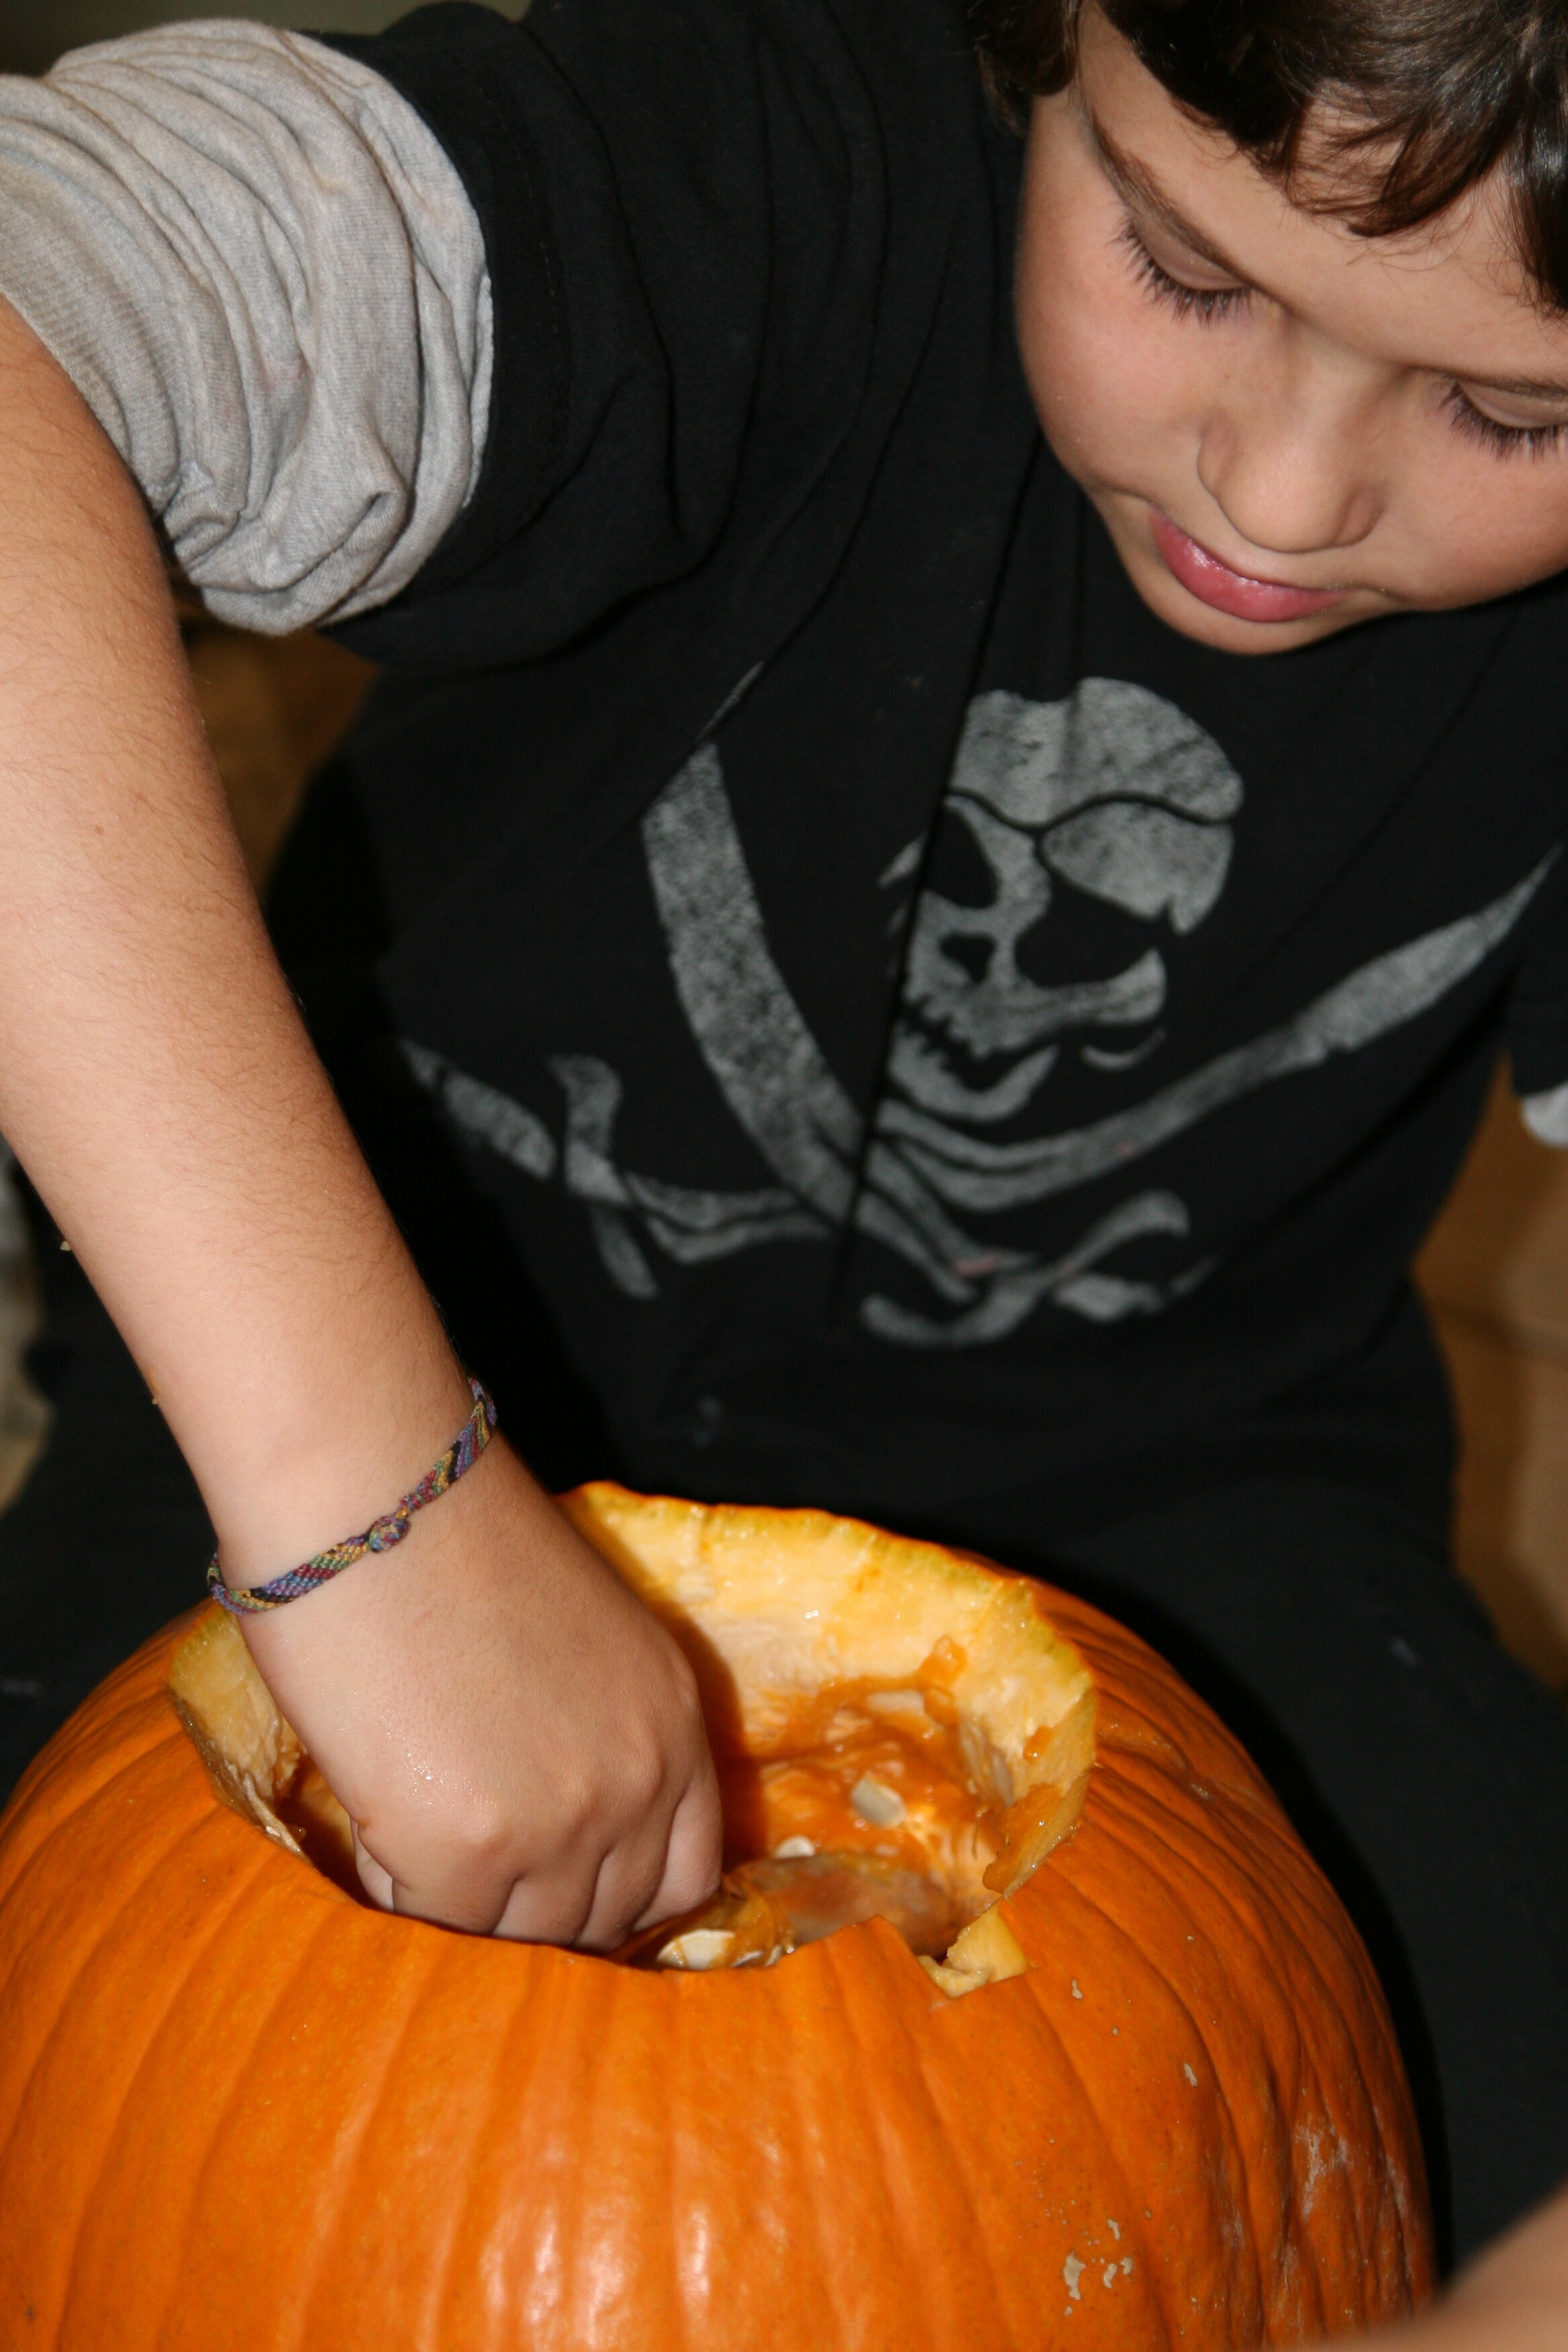 Yes, Jason now actually puts his hands in the pumpkin!